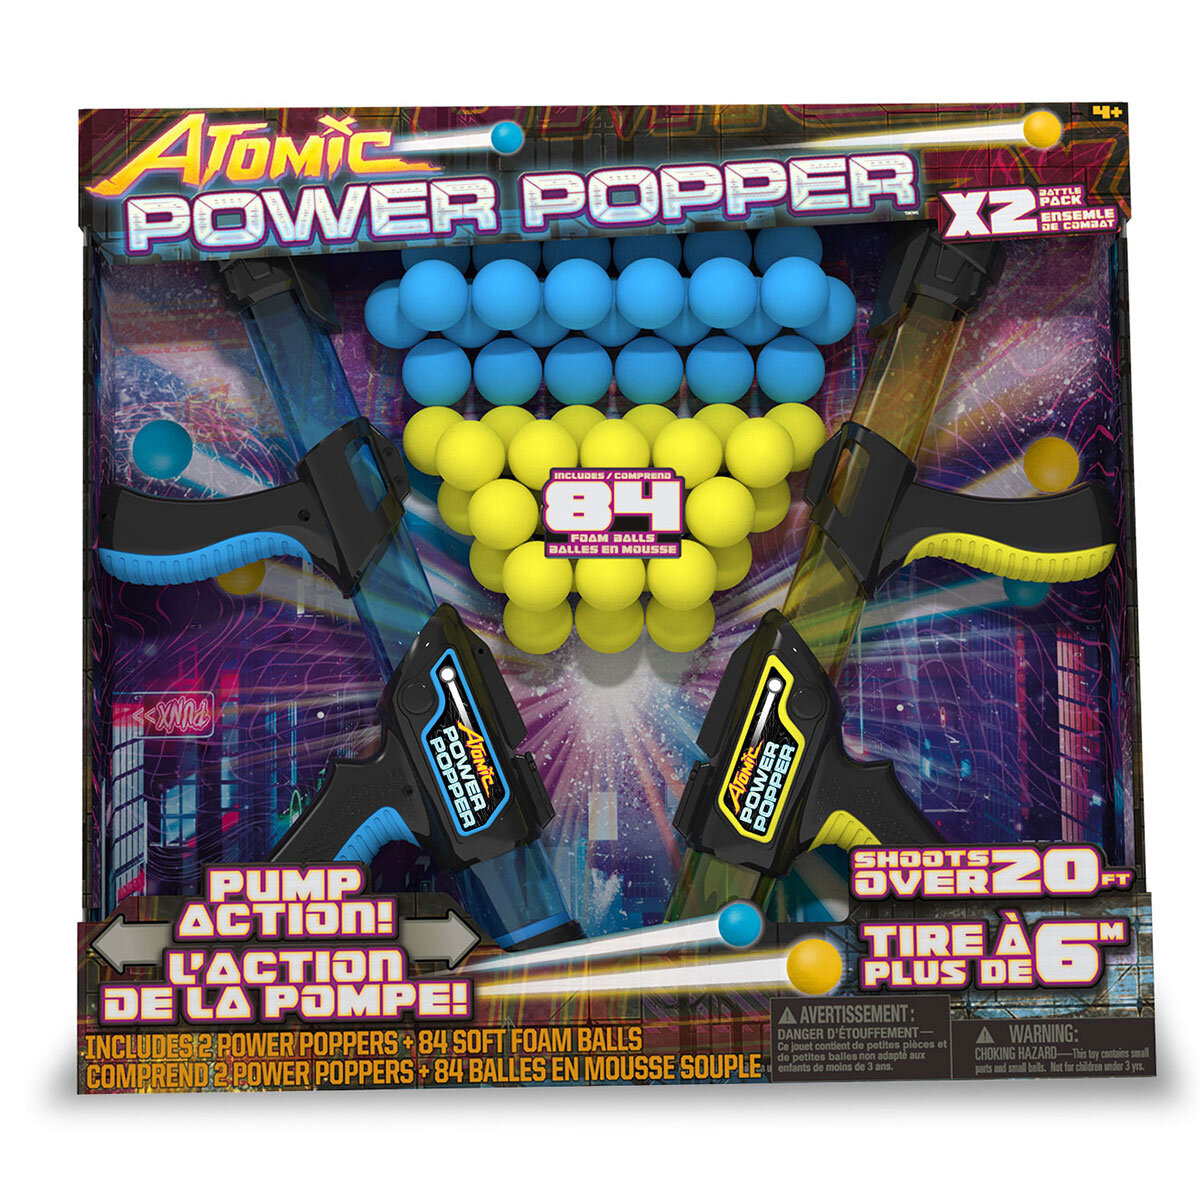 Buy Atomic Power Poppers Box Image at Costco.co.uk